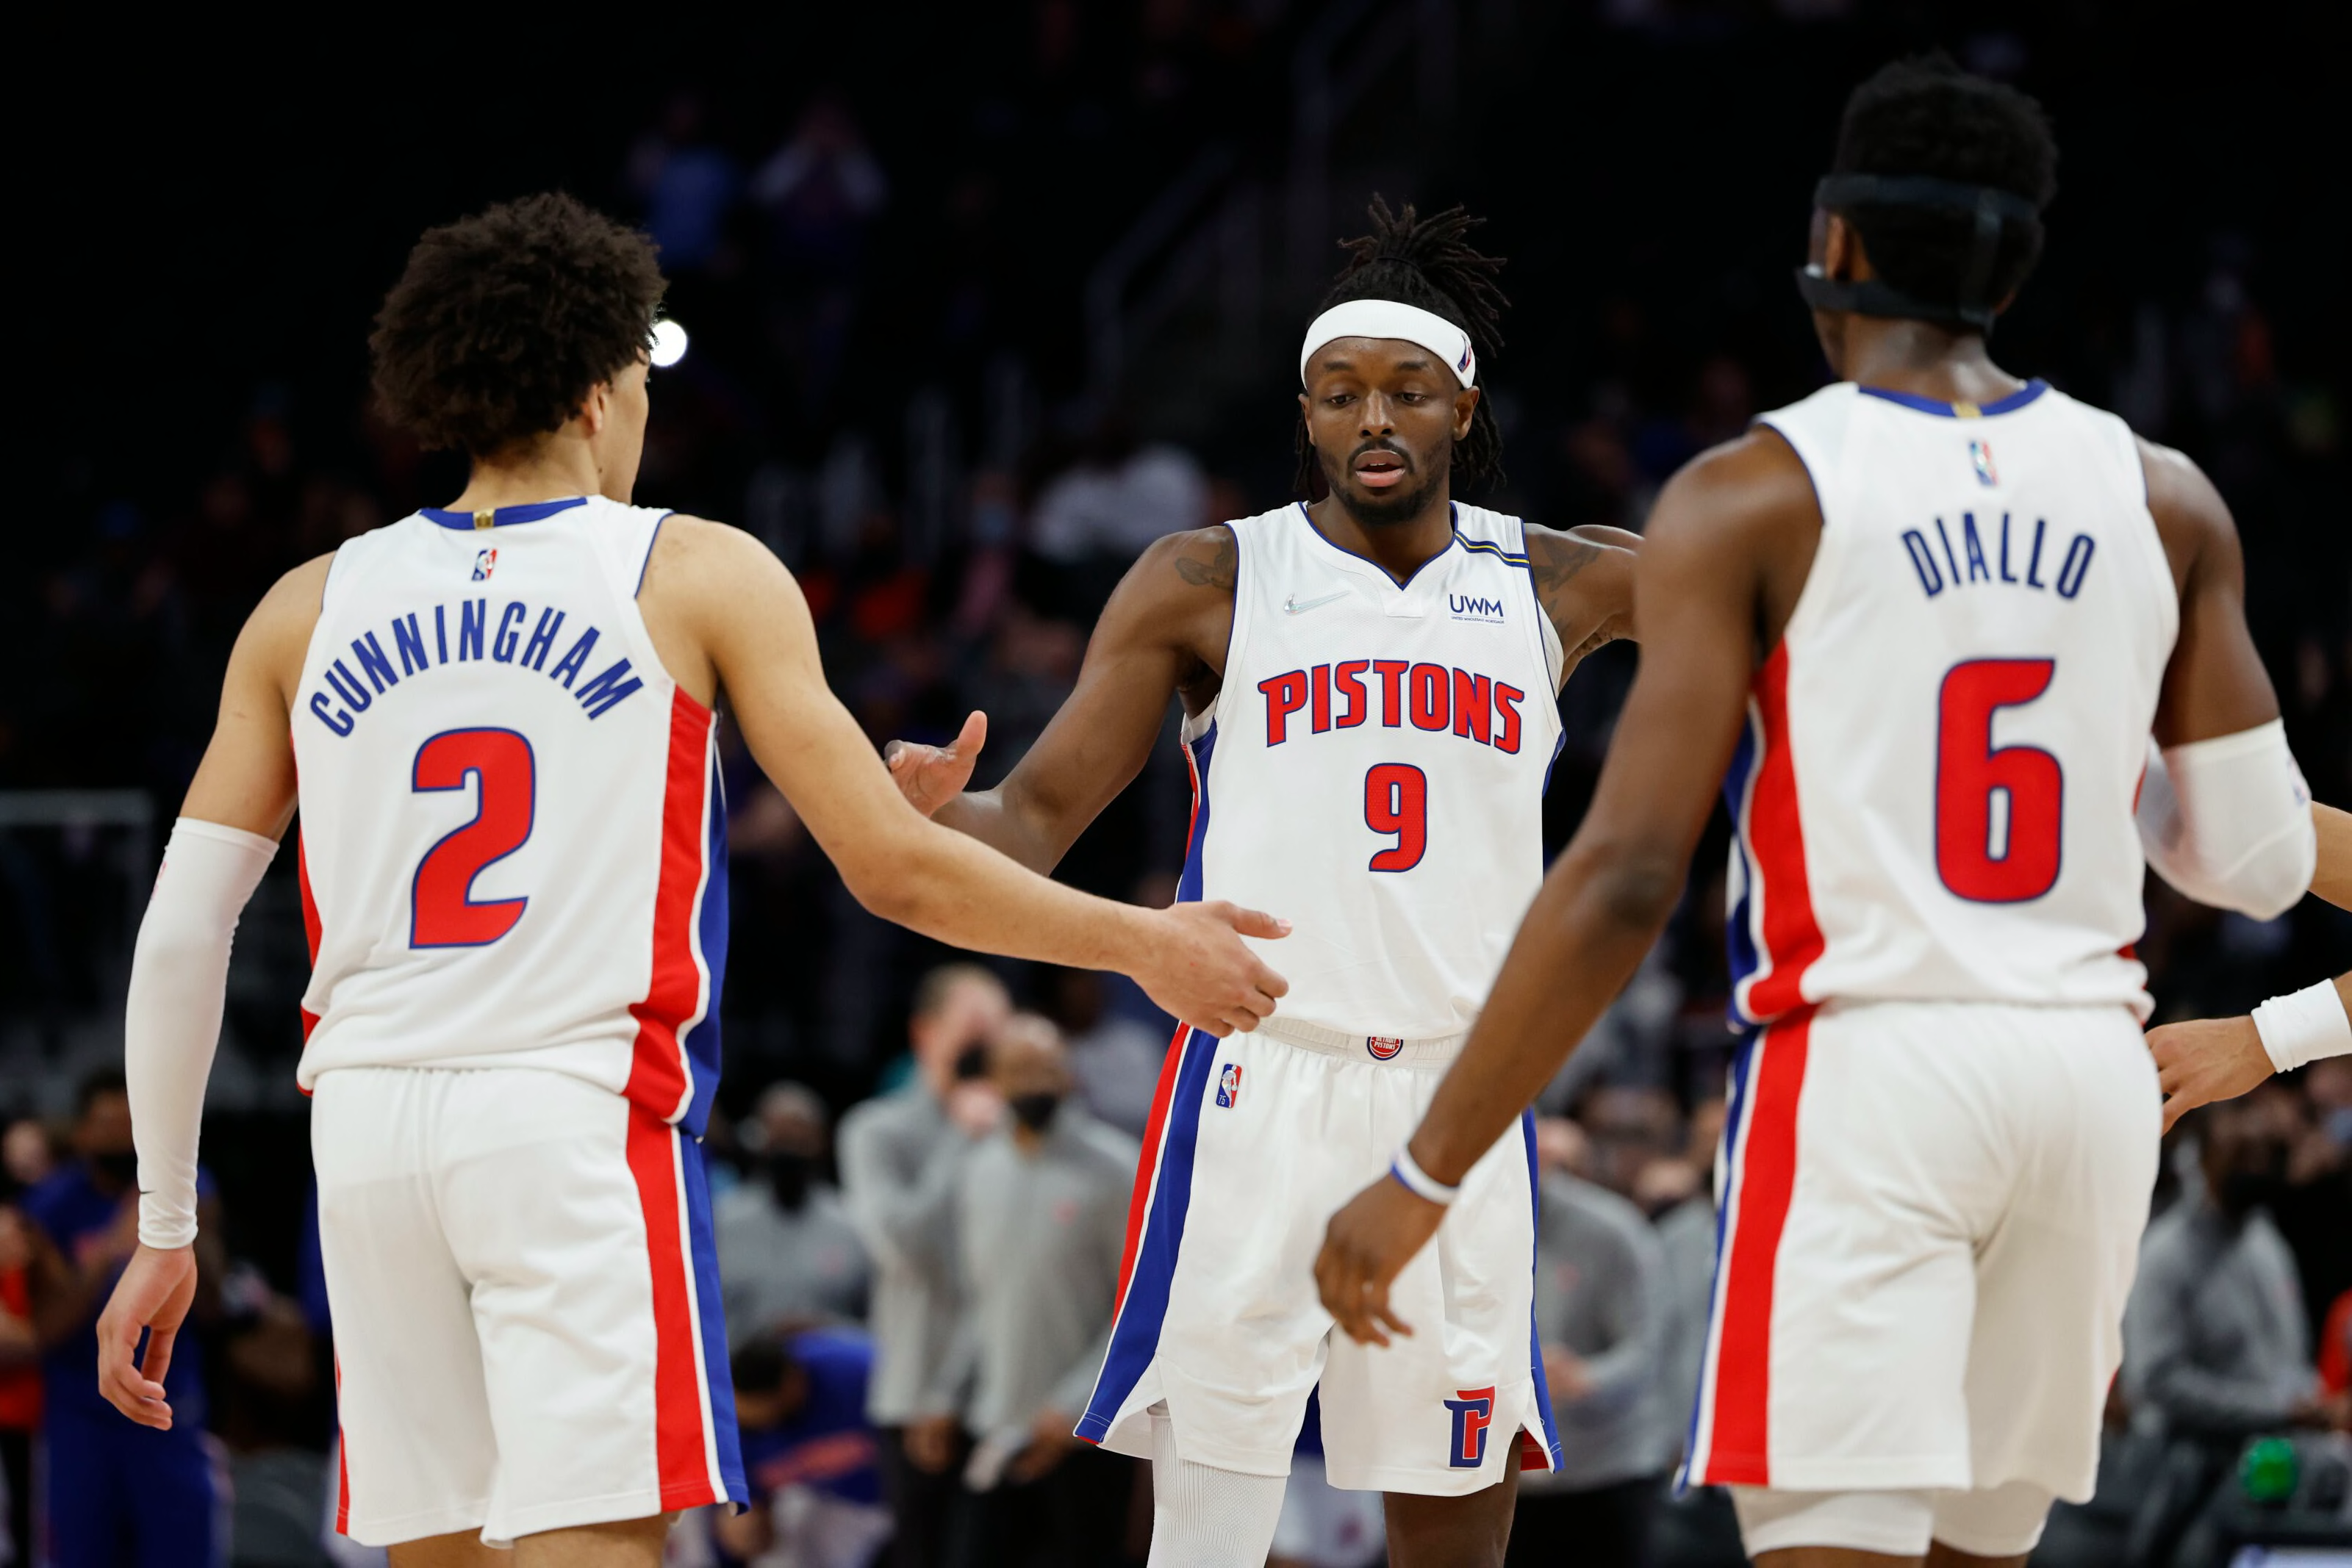 Imagining a future for the Detroit Pistons with Jerami Grant